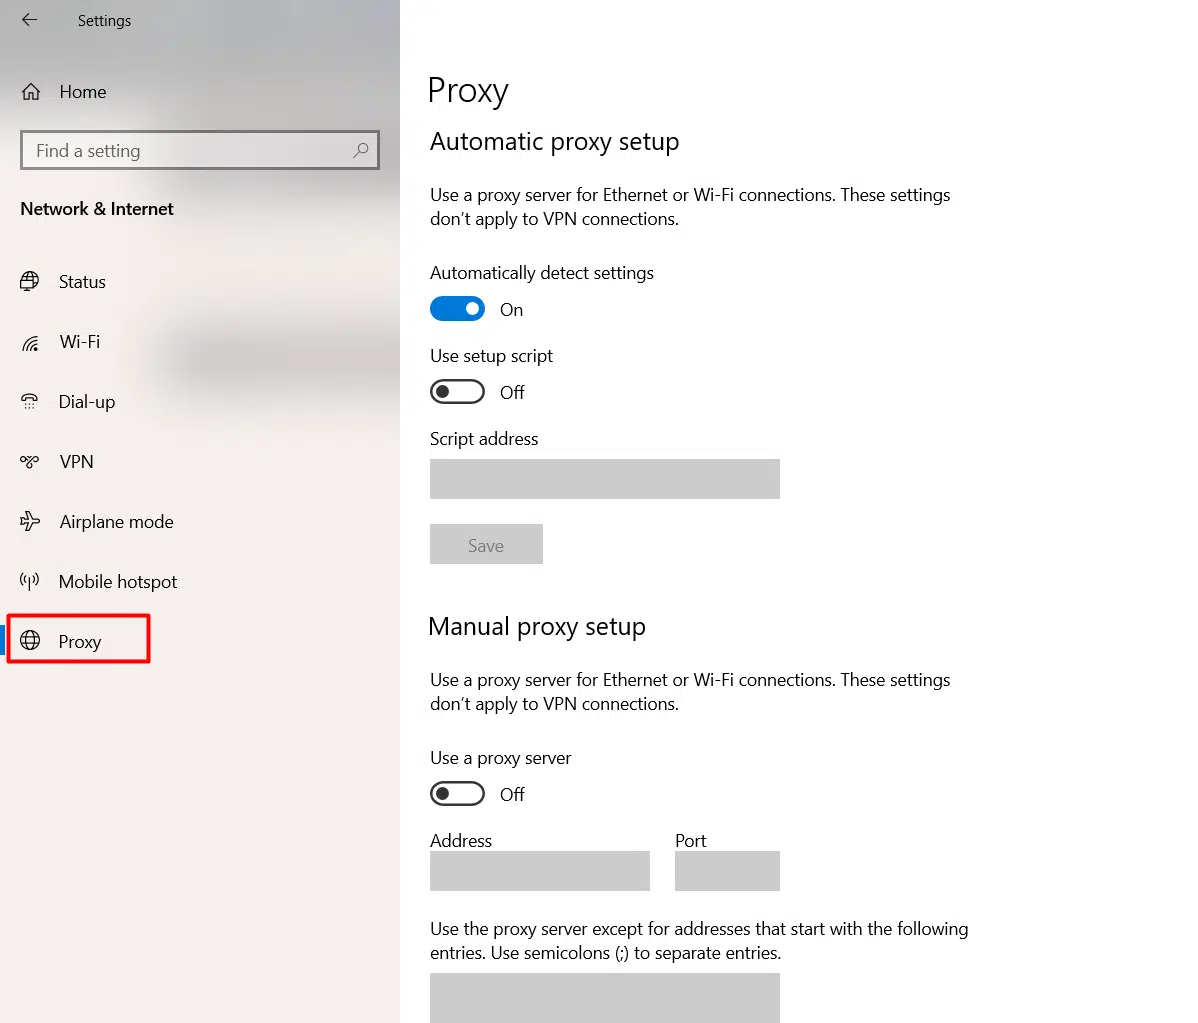 Deactivating the proxy on Windows